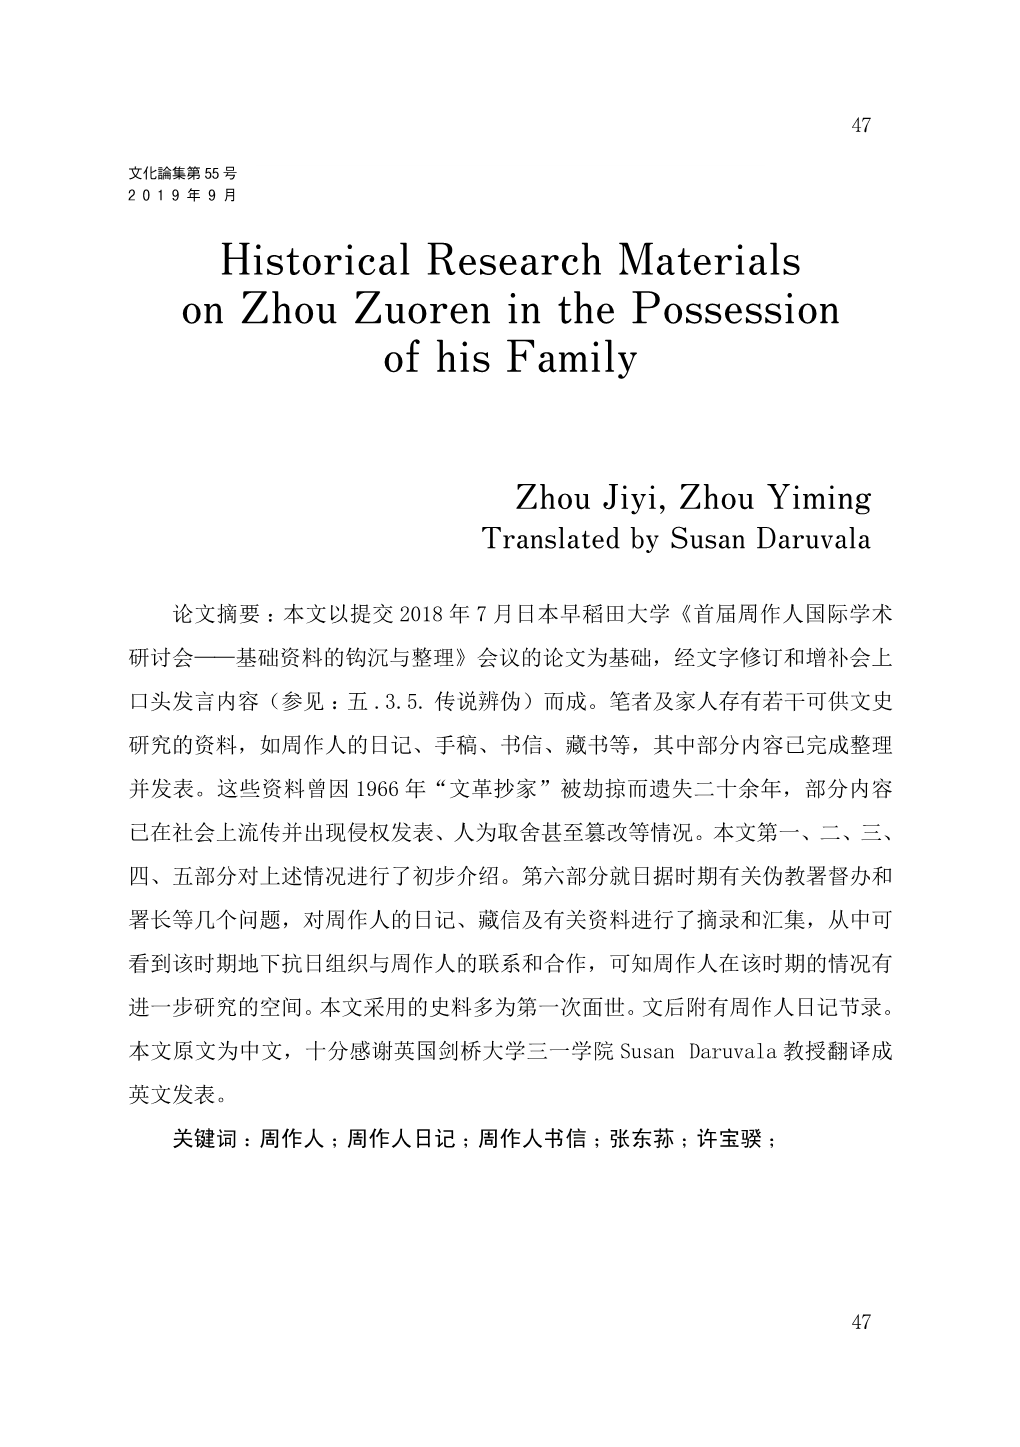 Historical Research Materials on Zhou Zuoren in the Possession of His Family 47